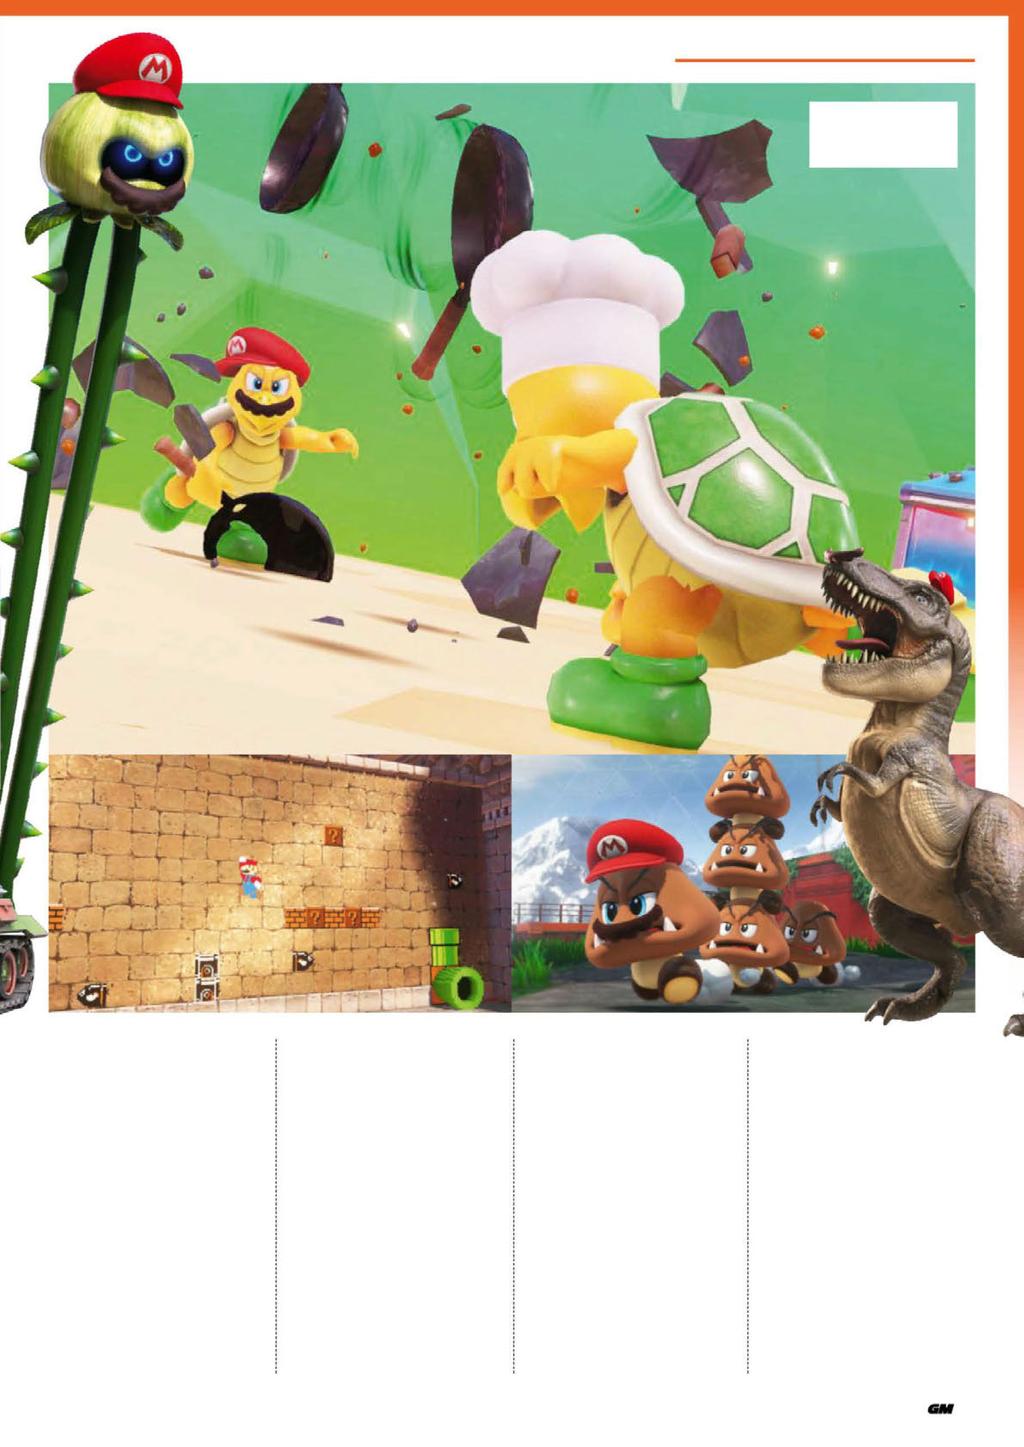 THe 51 BeST GaMeS of 2017 In Luncheon Kingdom, possess a Hammer Bro and you can lob frying pans at your foes. collectibles. We almost feel too powerful for Odyssey s feeble foes.